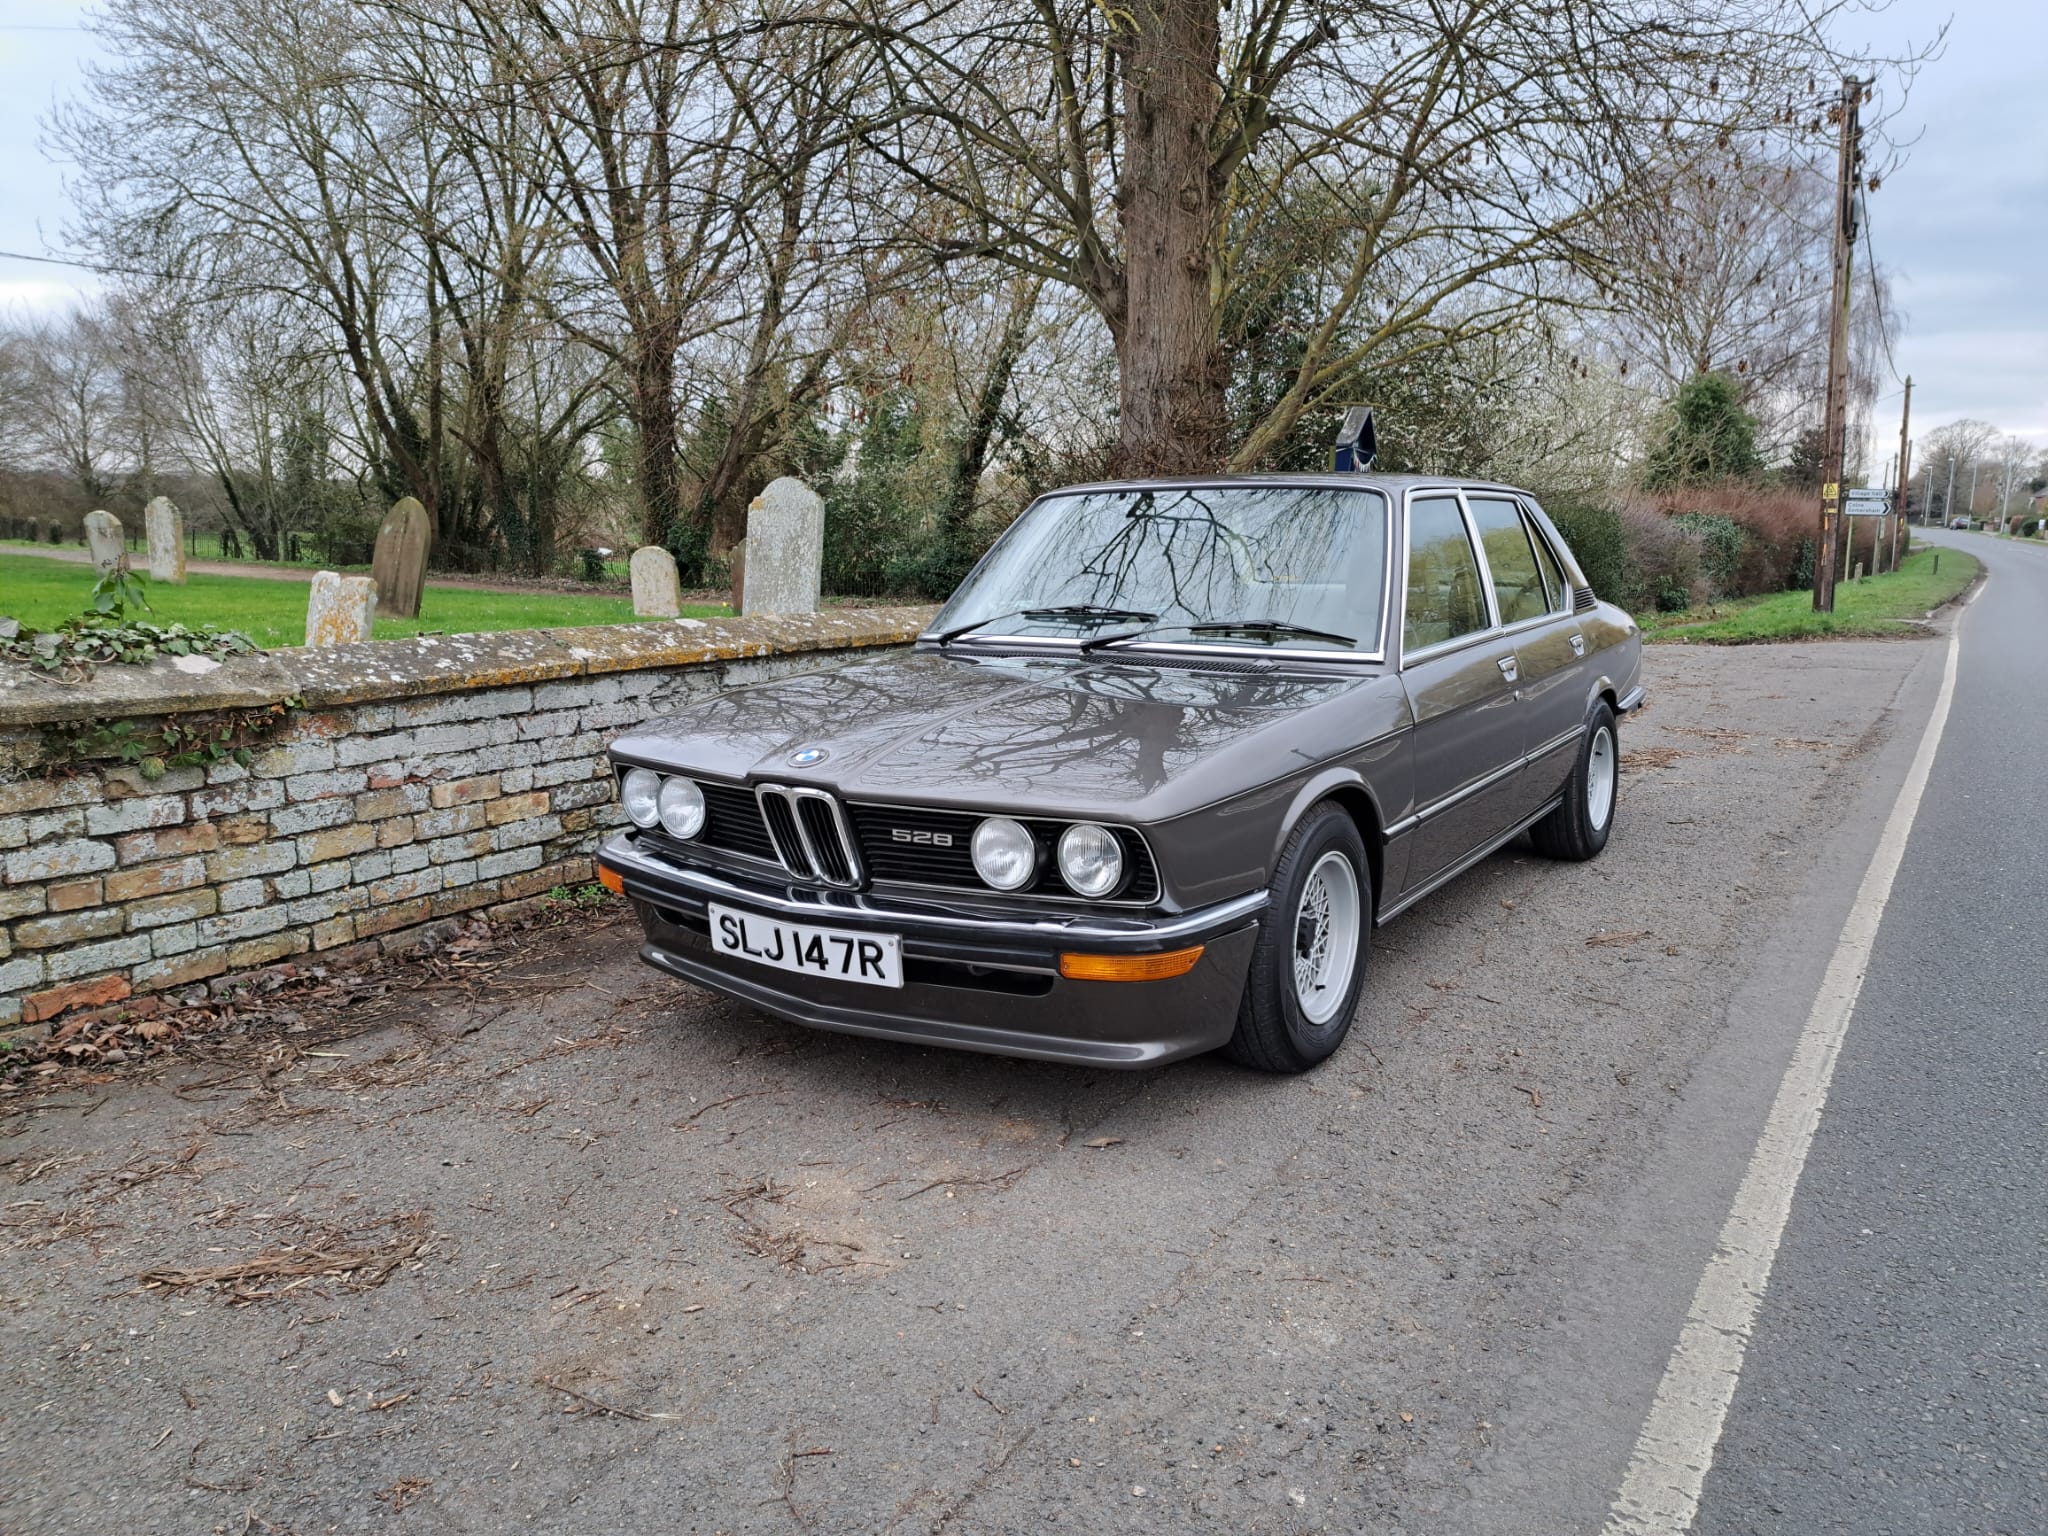 1977 BMW E12 528 - Page 4 - Readers' Cars - PistonHeads UK - The image shows a gray BMW car parked on the side of a road. The car has a license plate that reads "J61 KRJ". In the background, there are trees and a stone wall. The setting appears to be a rural or suburban area, as indicated by the greenery and the presence of a wall. The car's position suggests it may be waiting for someone to return from a nearby location.